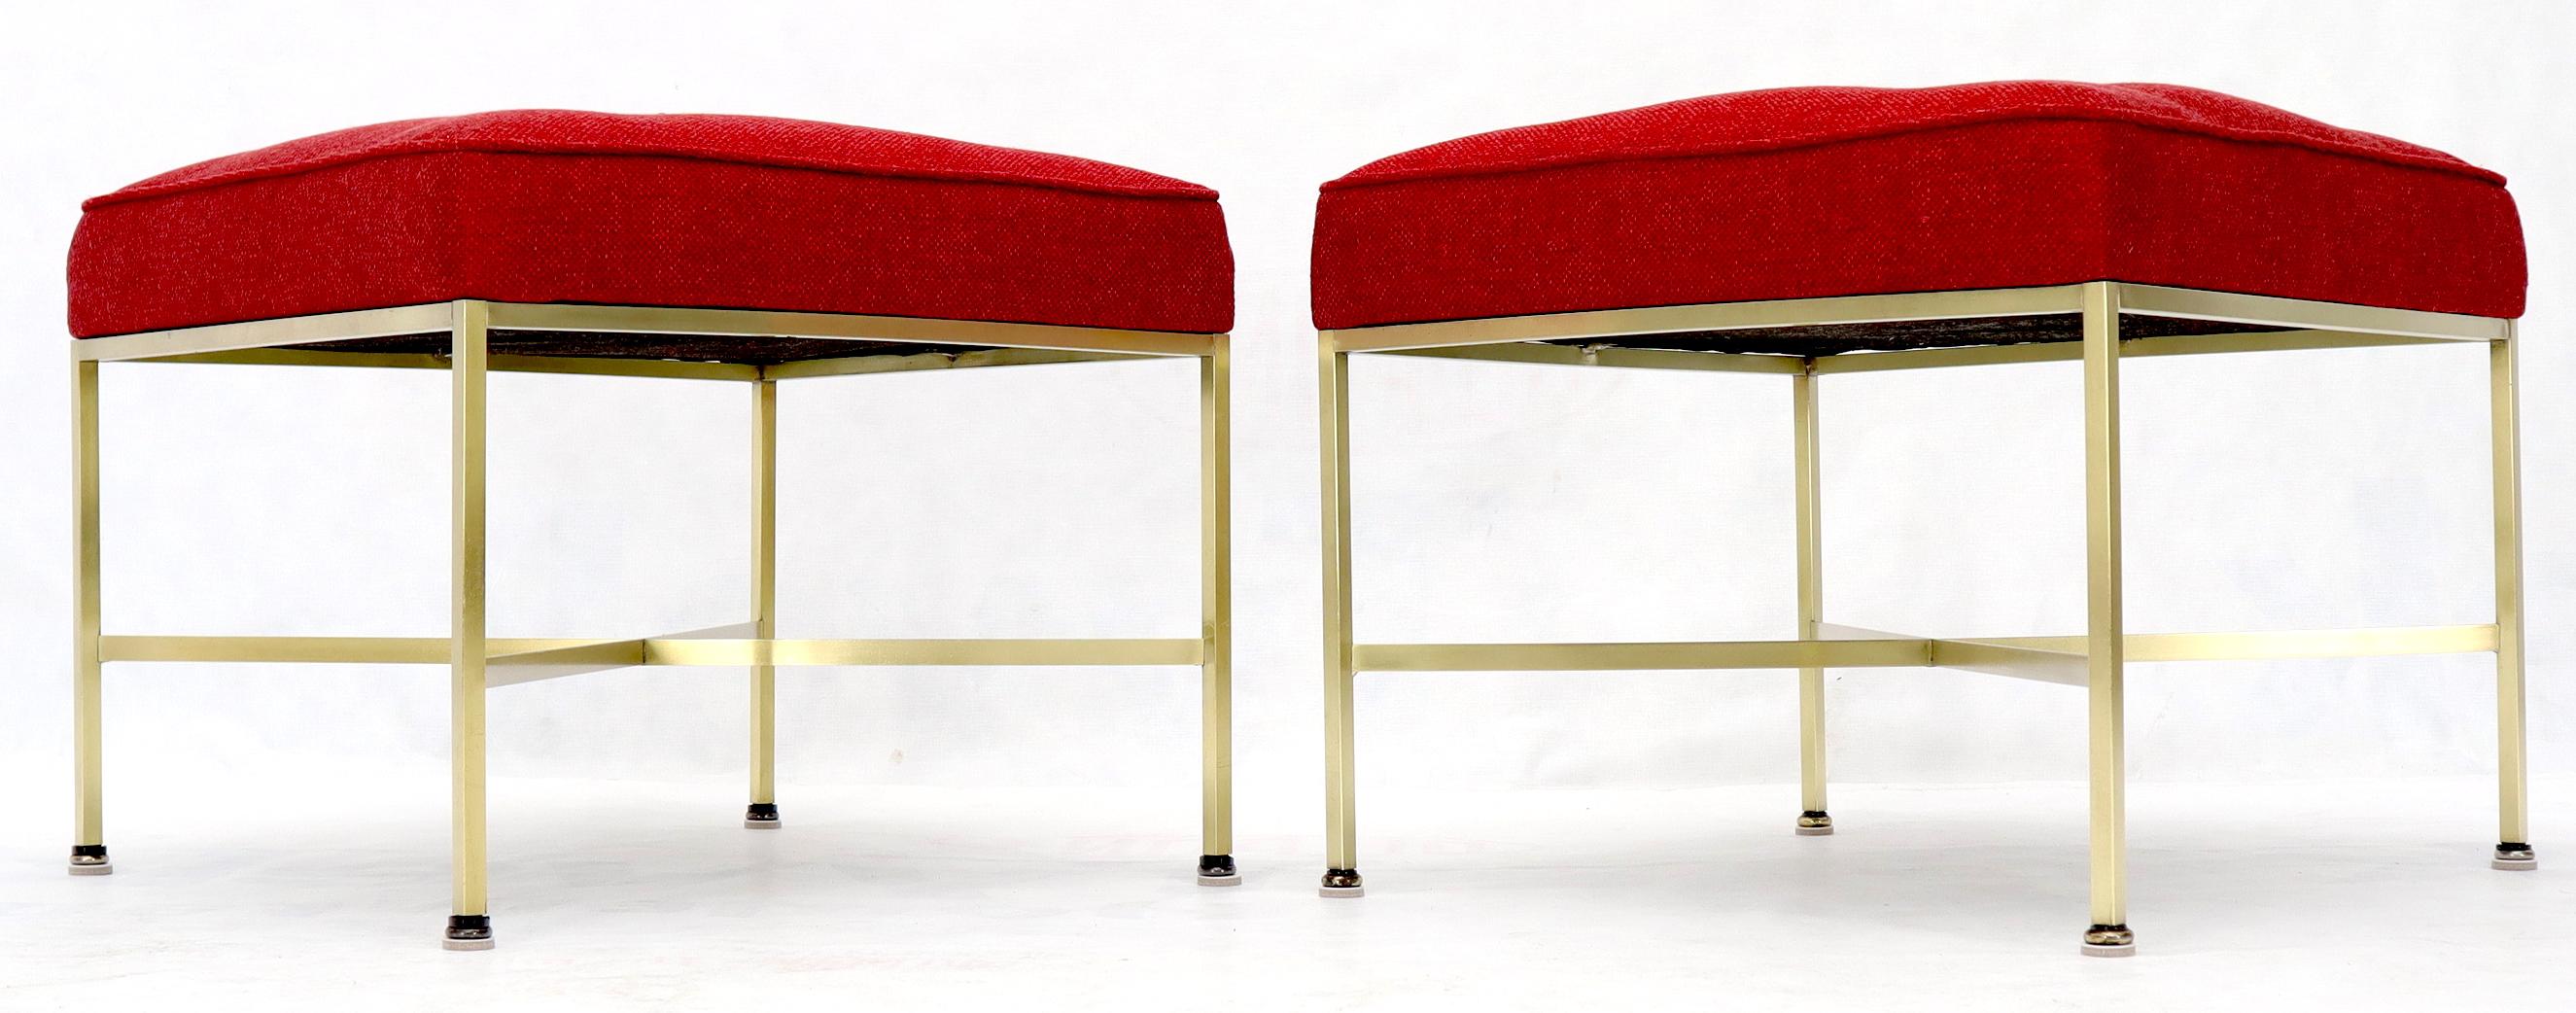 Pair of New Red Upholstery Square Brass Frames Benches Stools by Paul McCobb In Excellent Condition For Sale In Rockaway, NJ